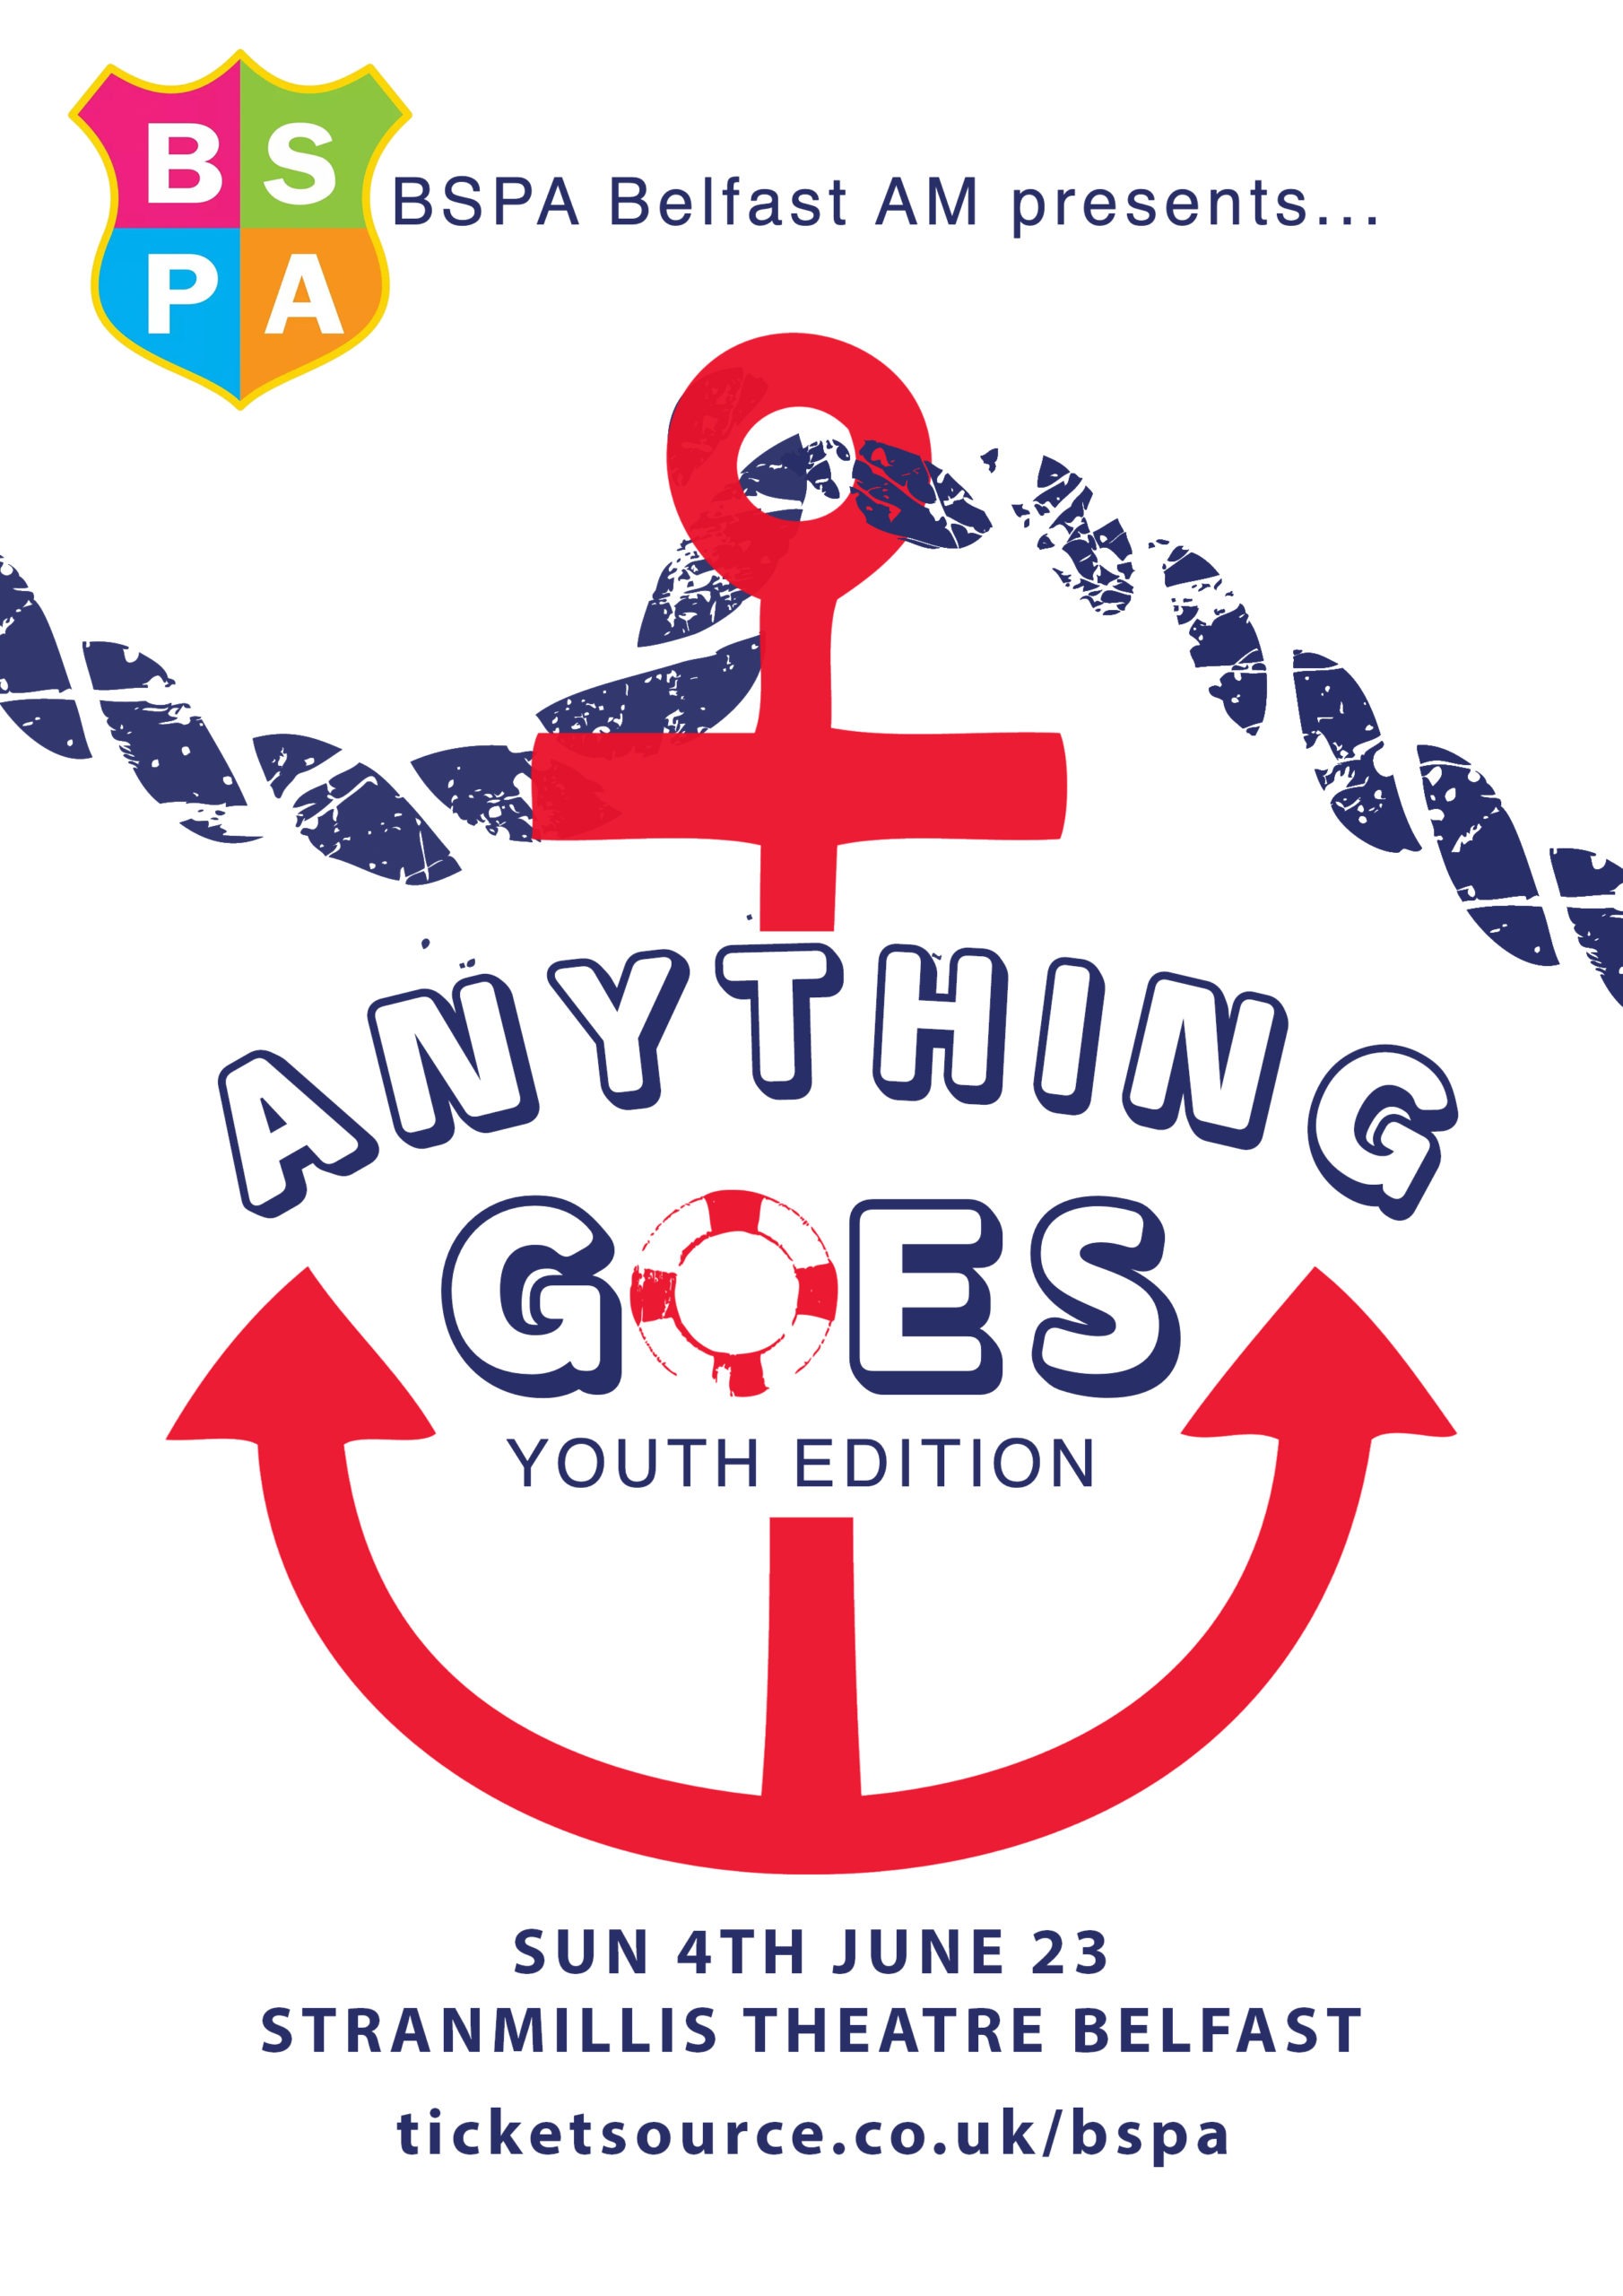 BSPA BELFAST AM presents “ANYTHING GOES” image